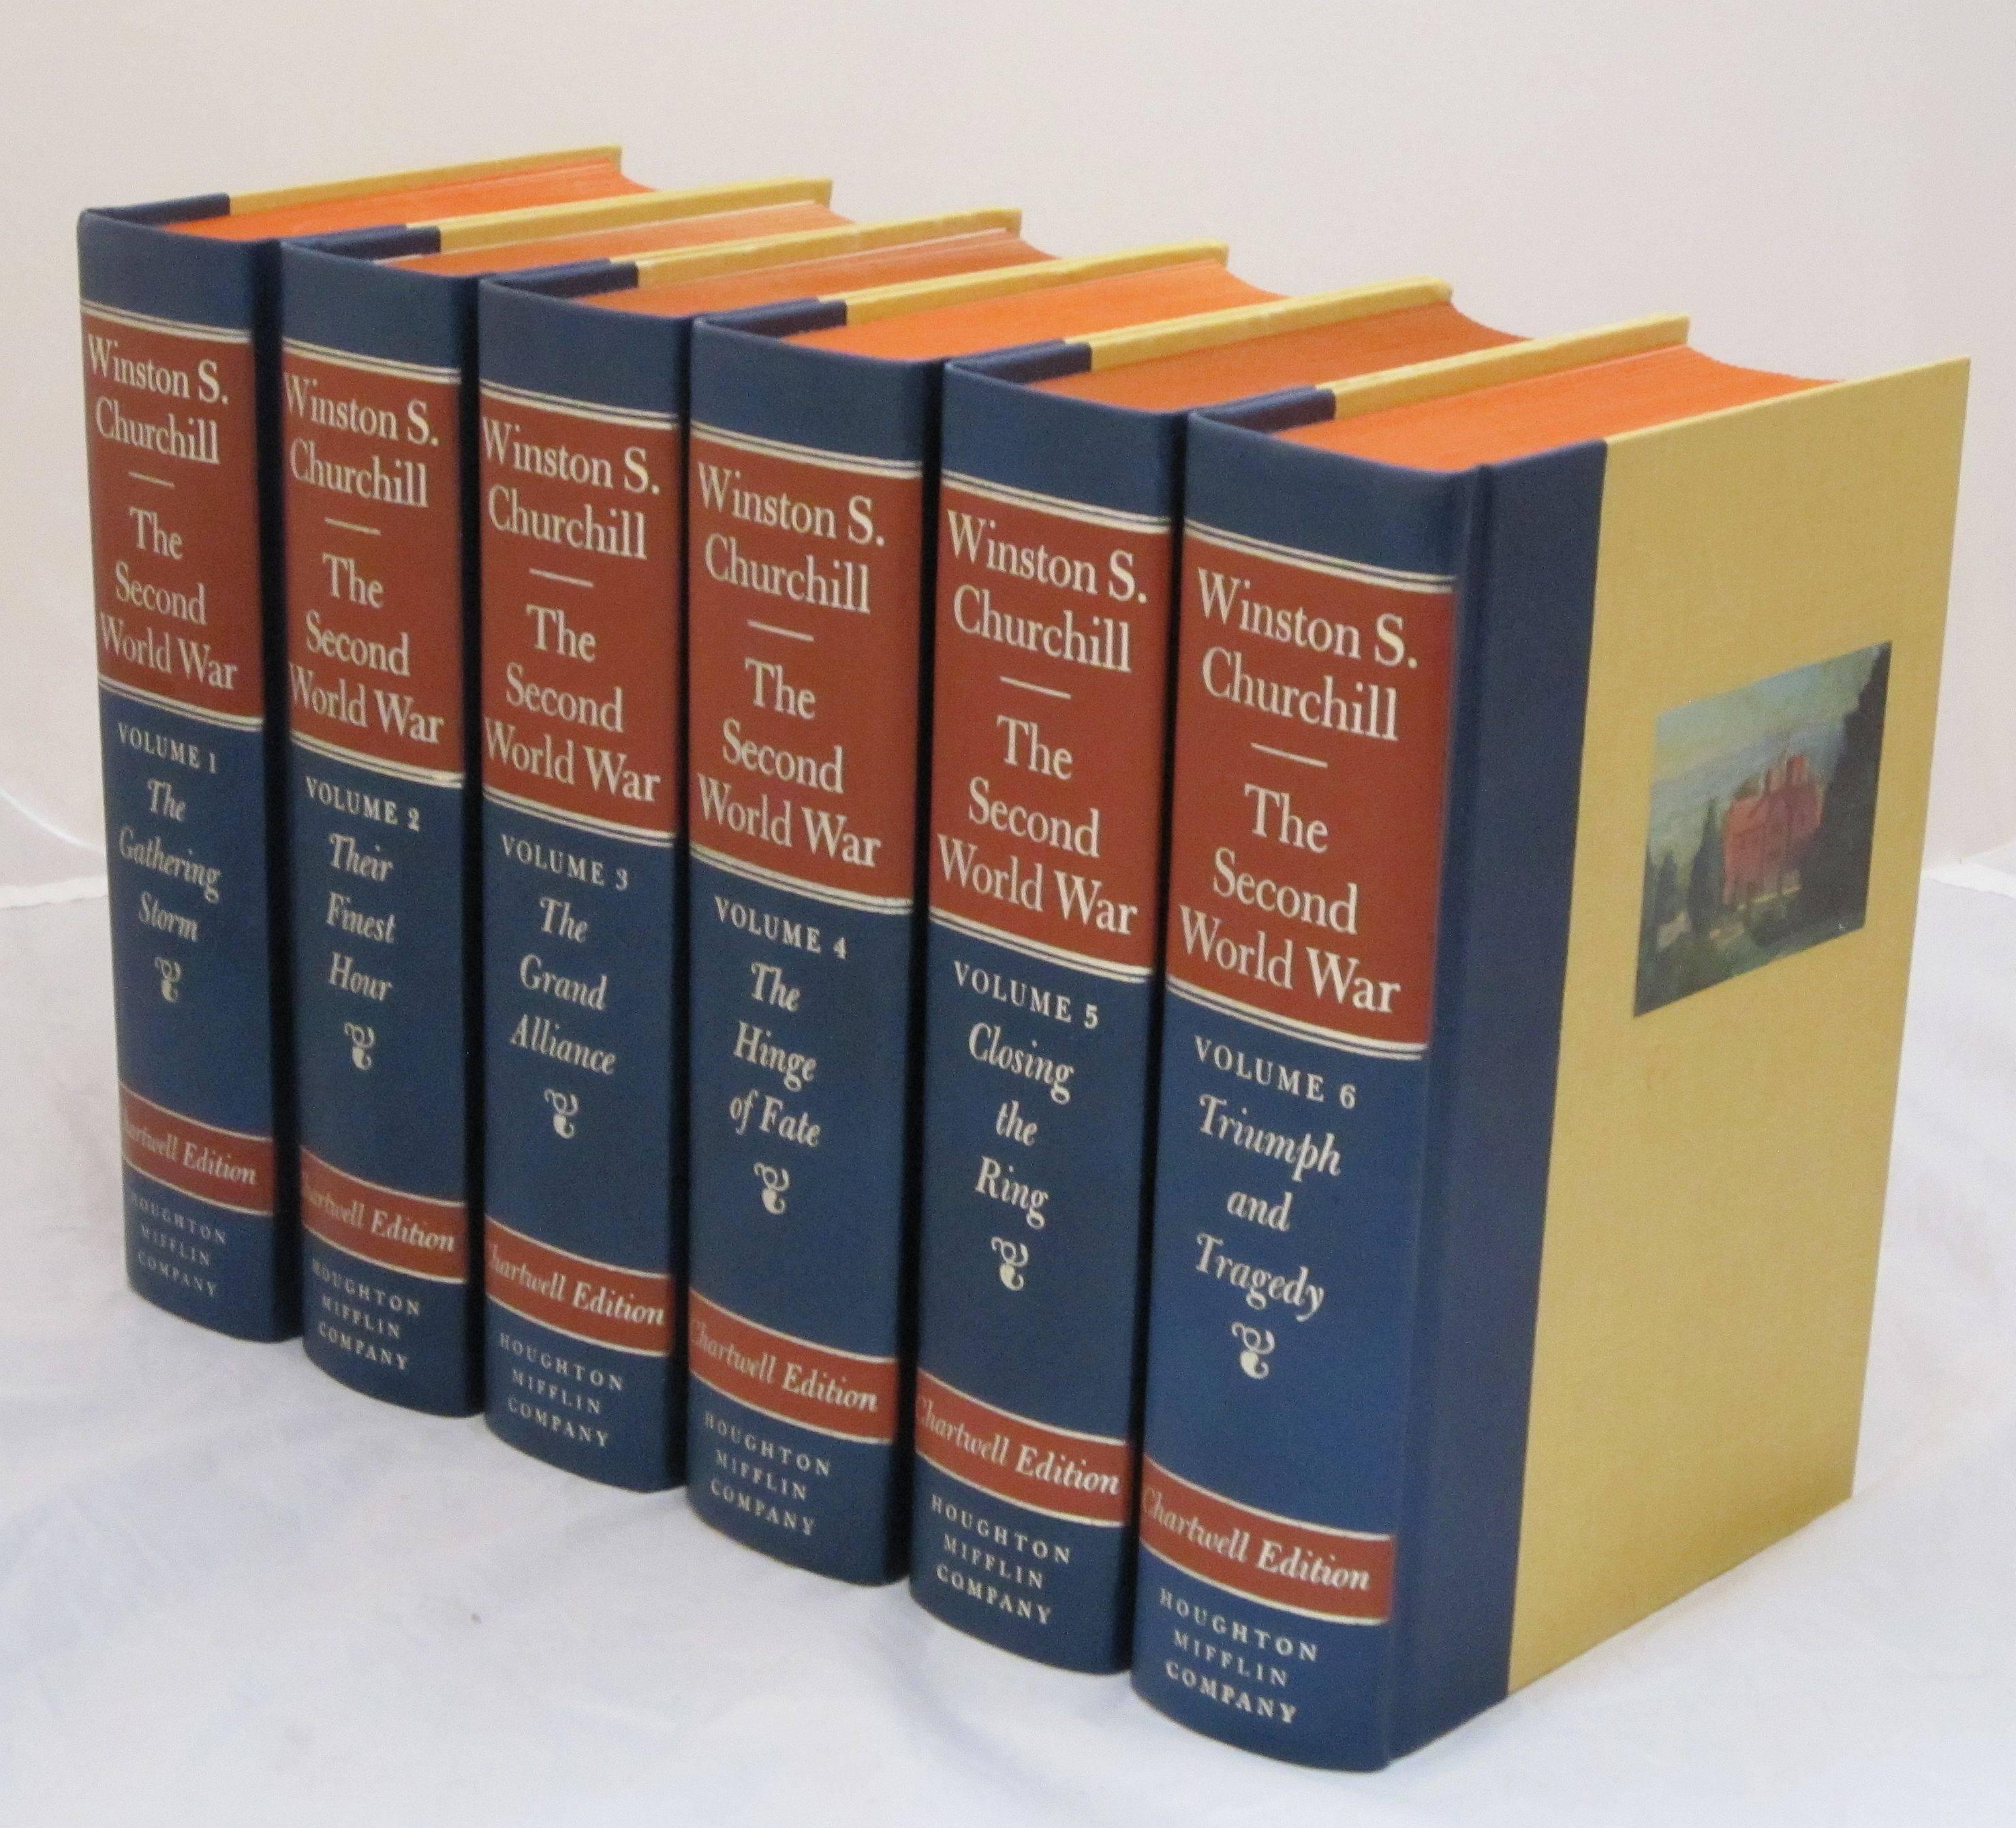 The Second World War (Chartwell Edition - United States) by Winston Churchill from Houghton-Mifflin Company, Boston.

A deluxe edition of Winston Churchill's six-volume memoir, The Second World War, for which he was awarded the Nobel Prize in